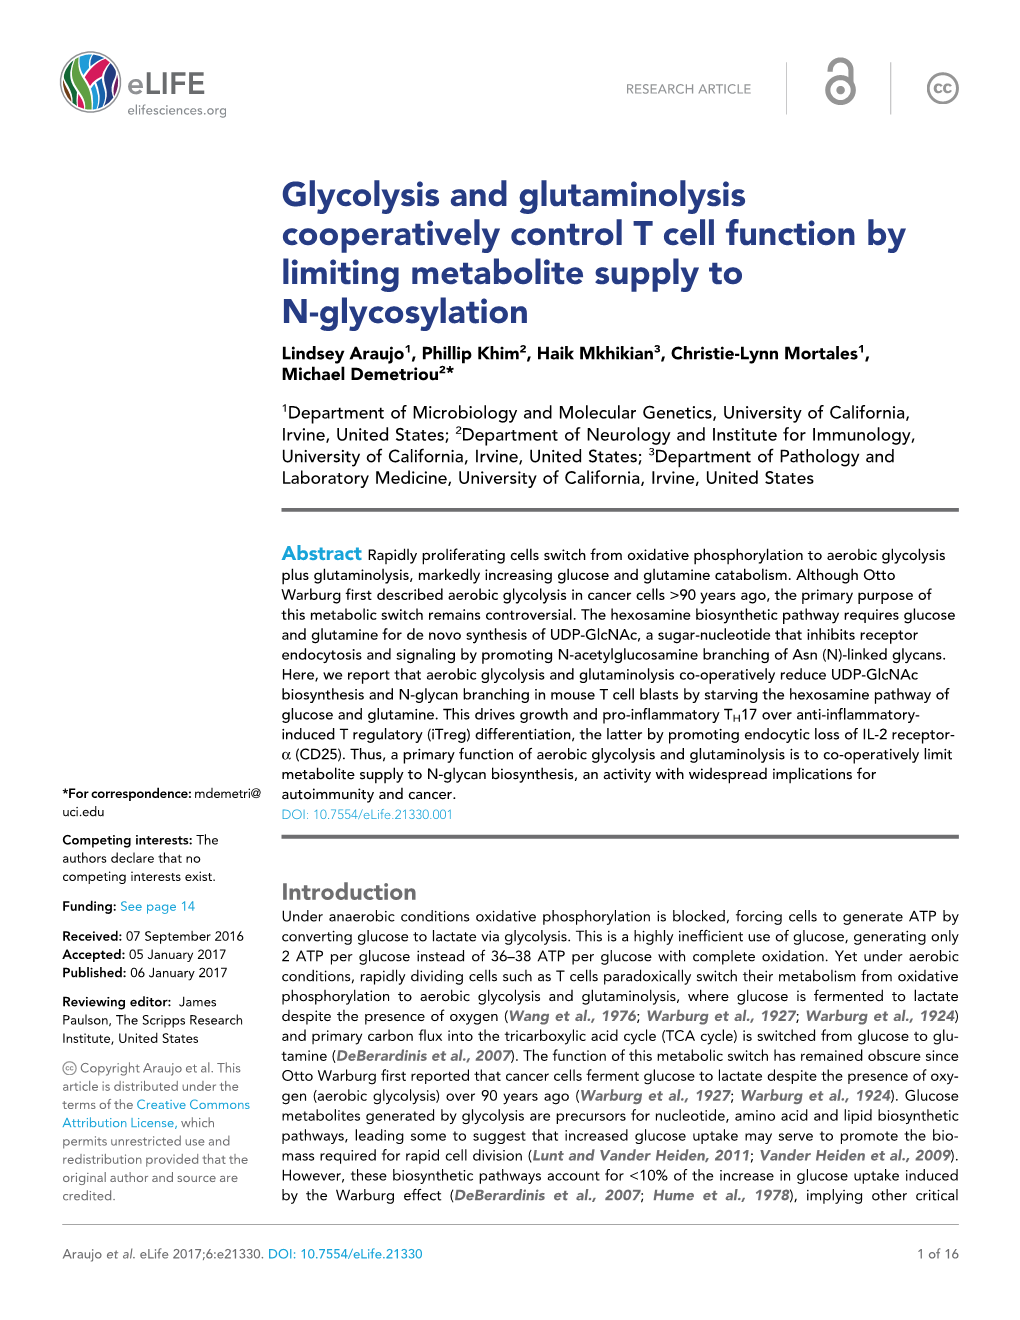 Glycolysis and Glutaminolysis Cooperatively Control T Cell Function